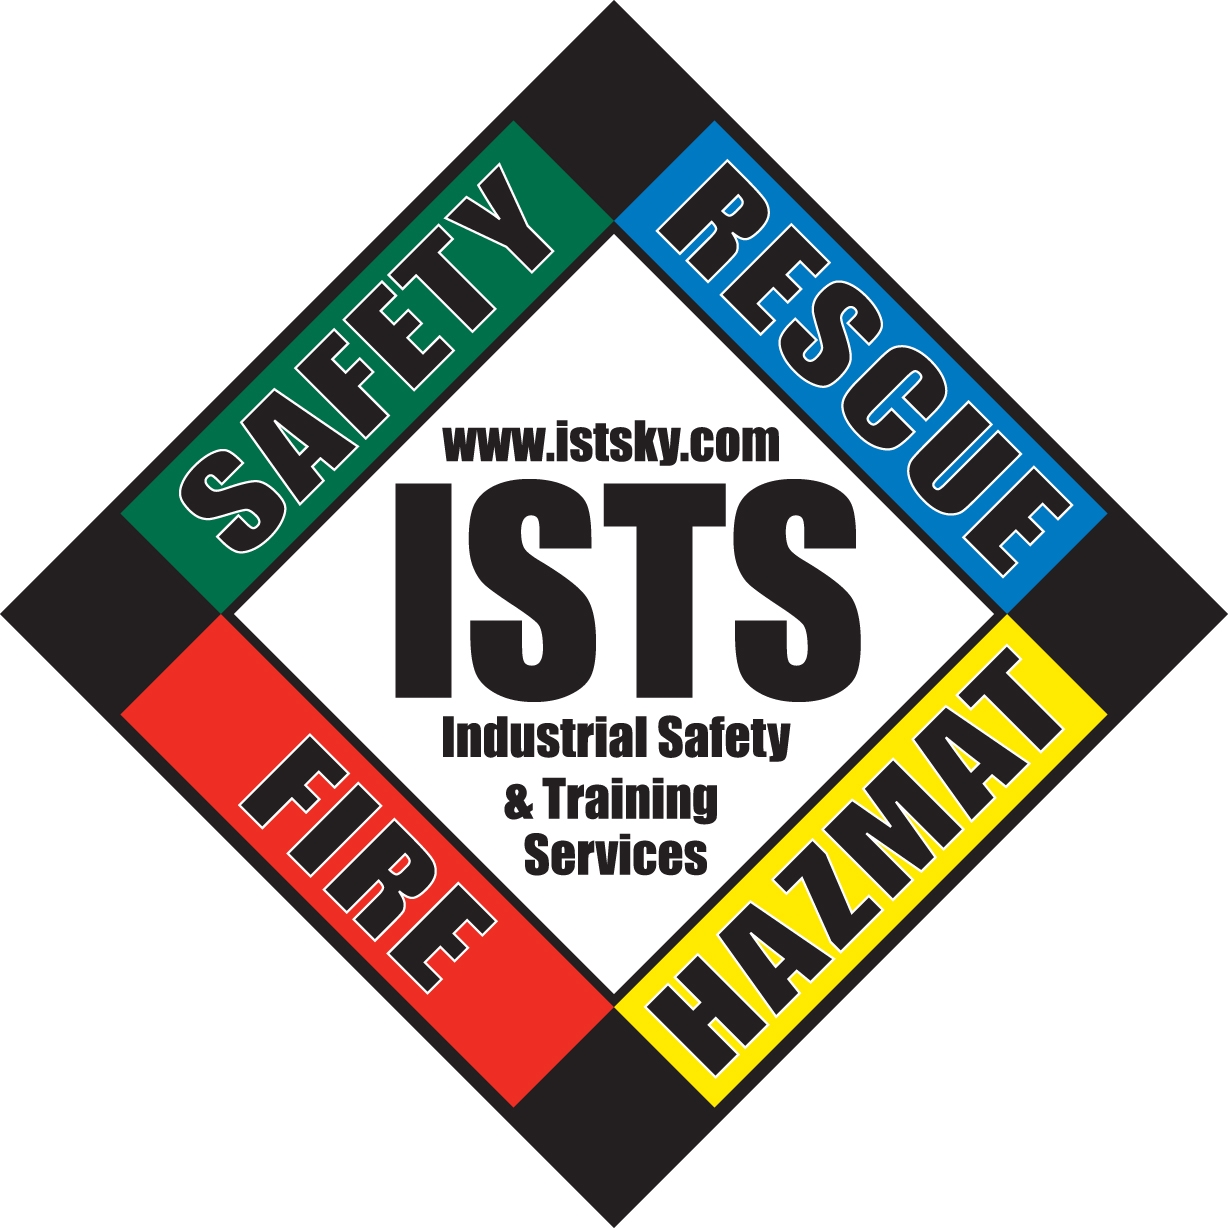 Industrial Safety Training Services Jobs Ehscareers